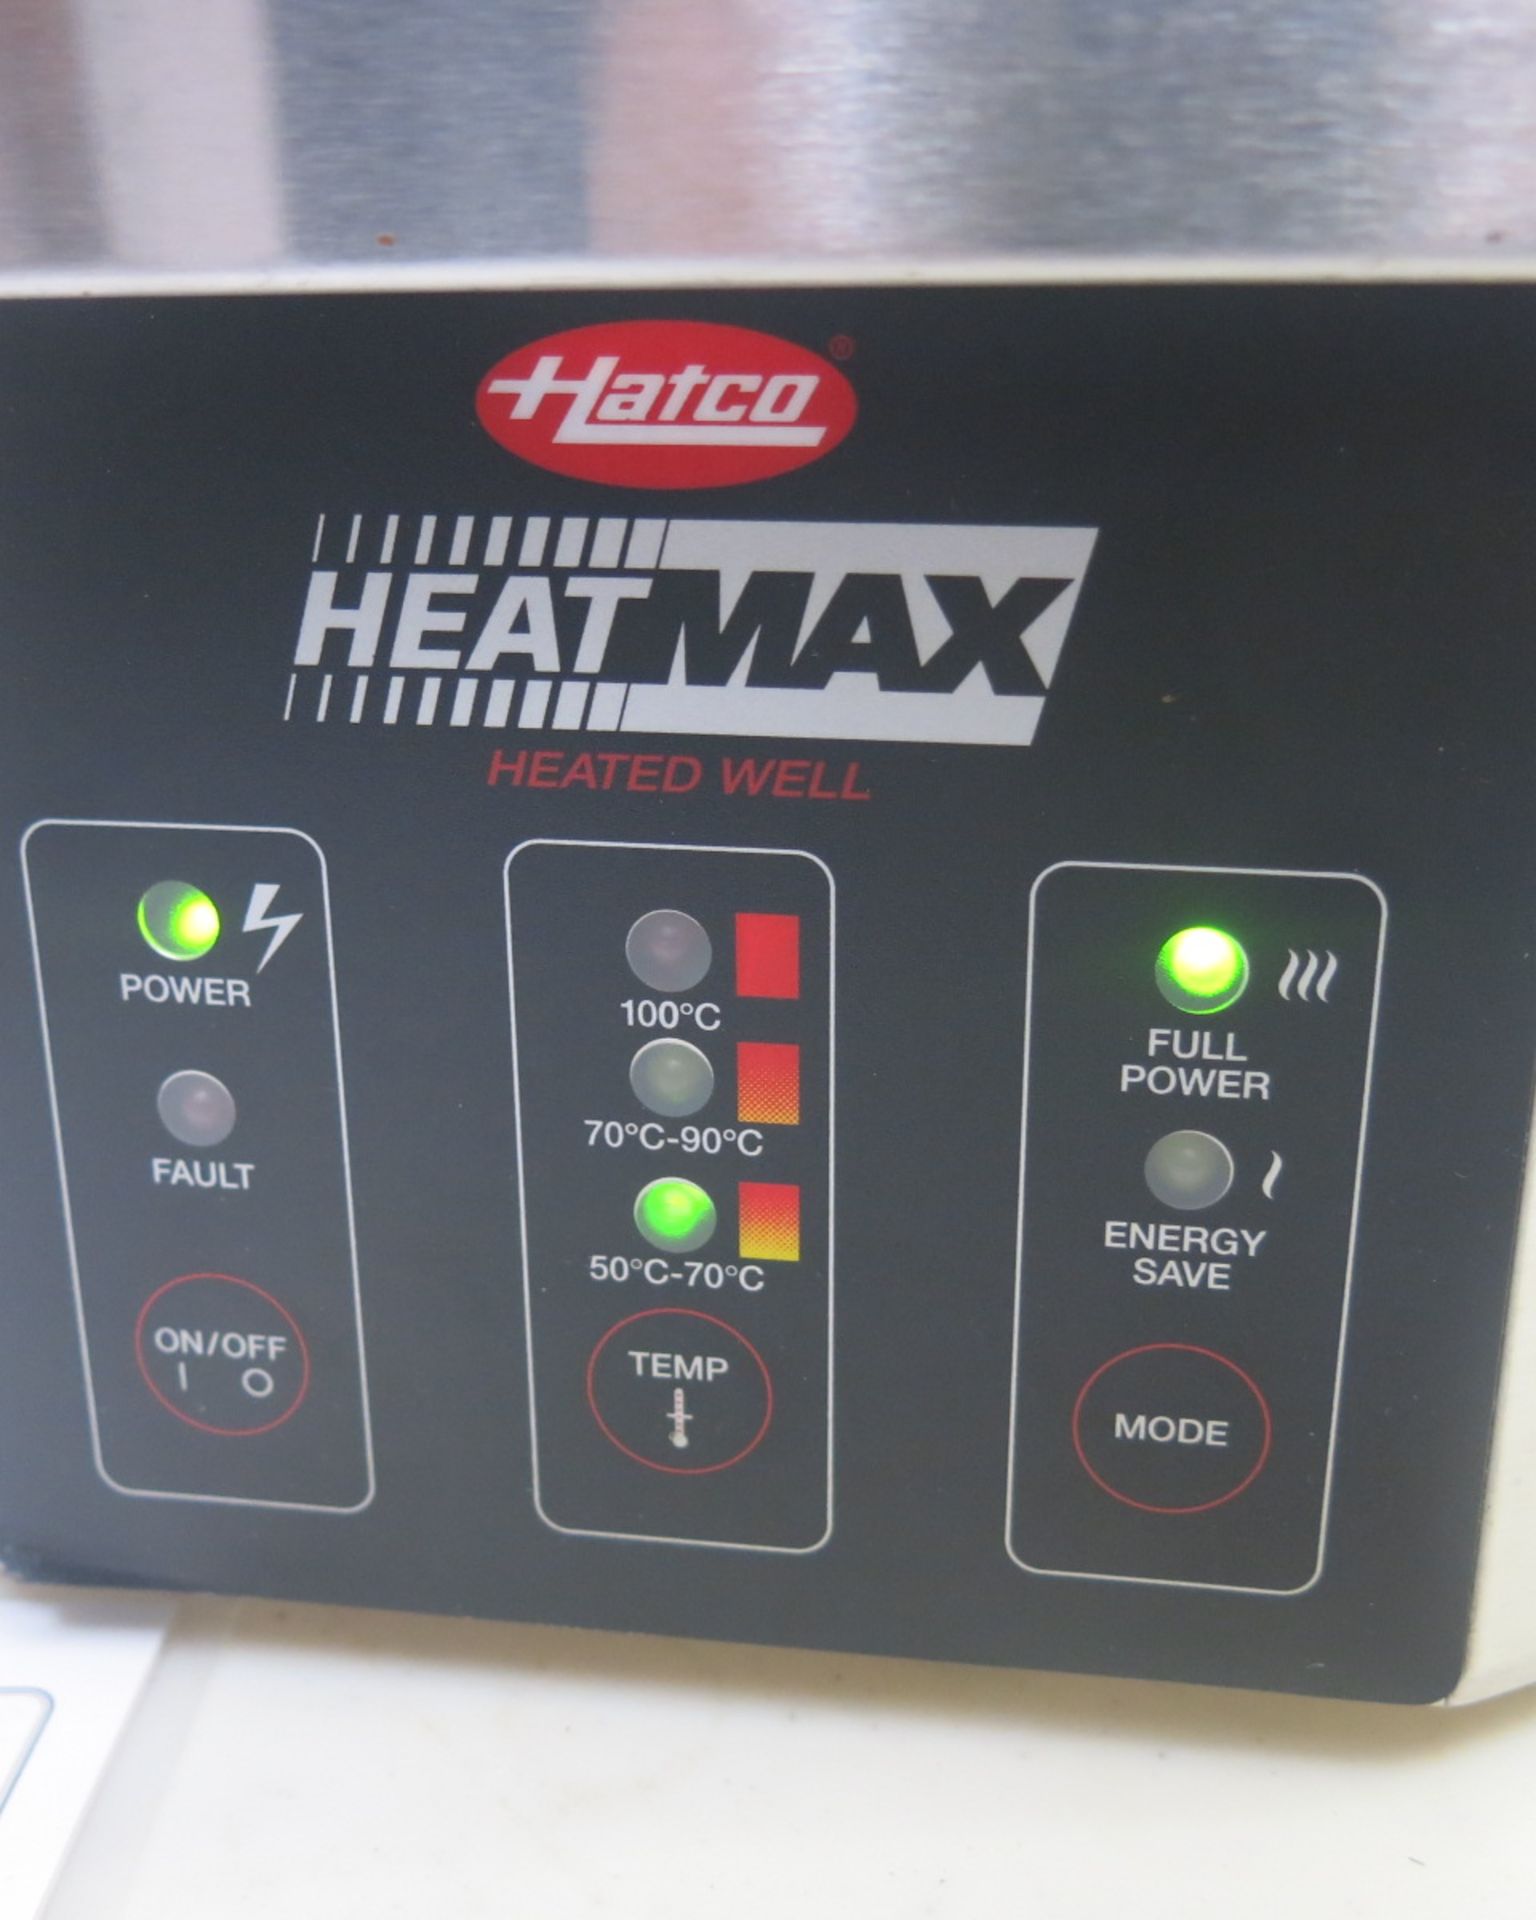 Hatco Heat Max Heated Well, Model RHW-01. Comes with Pot, Lid, Ladle & Instruction Manual. - Image 3 of 5